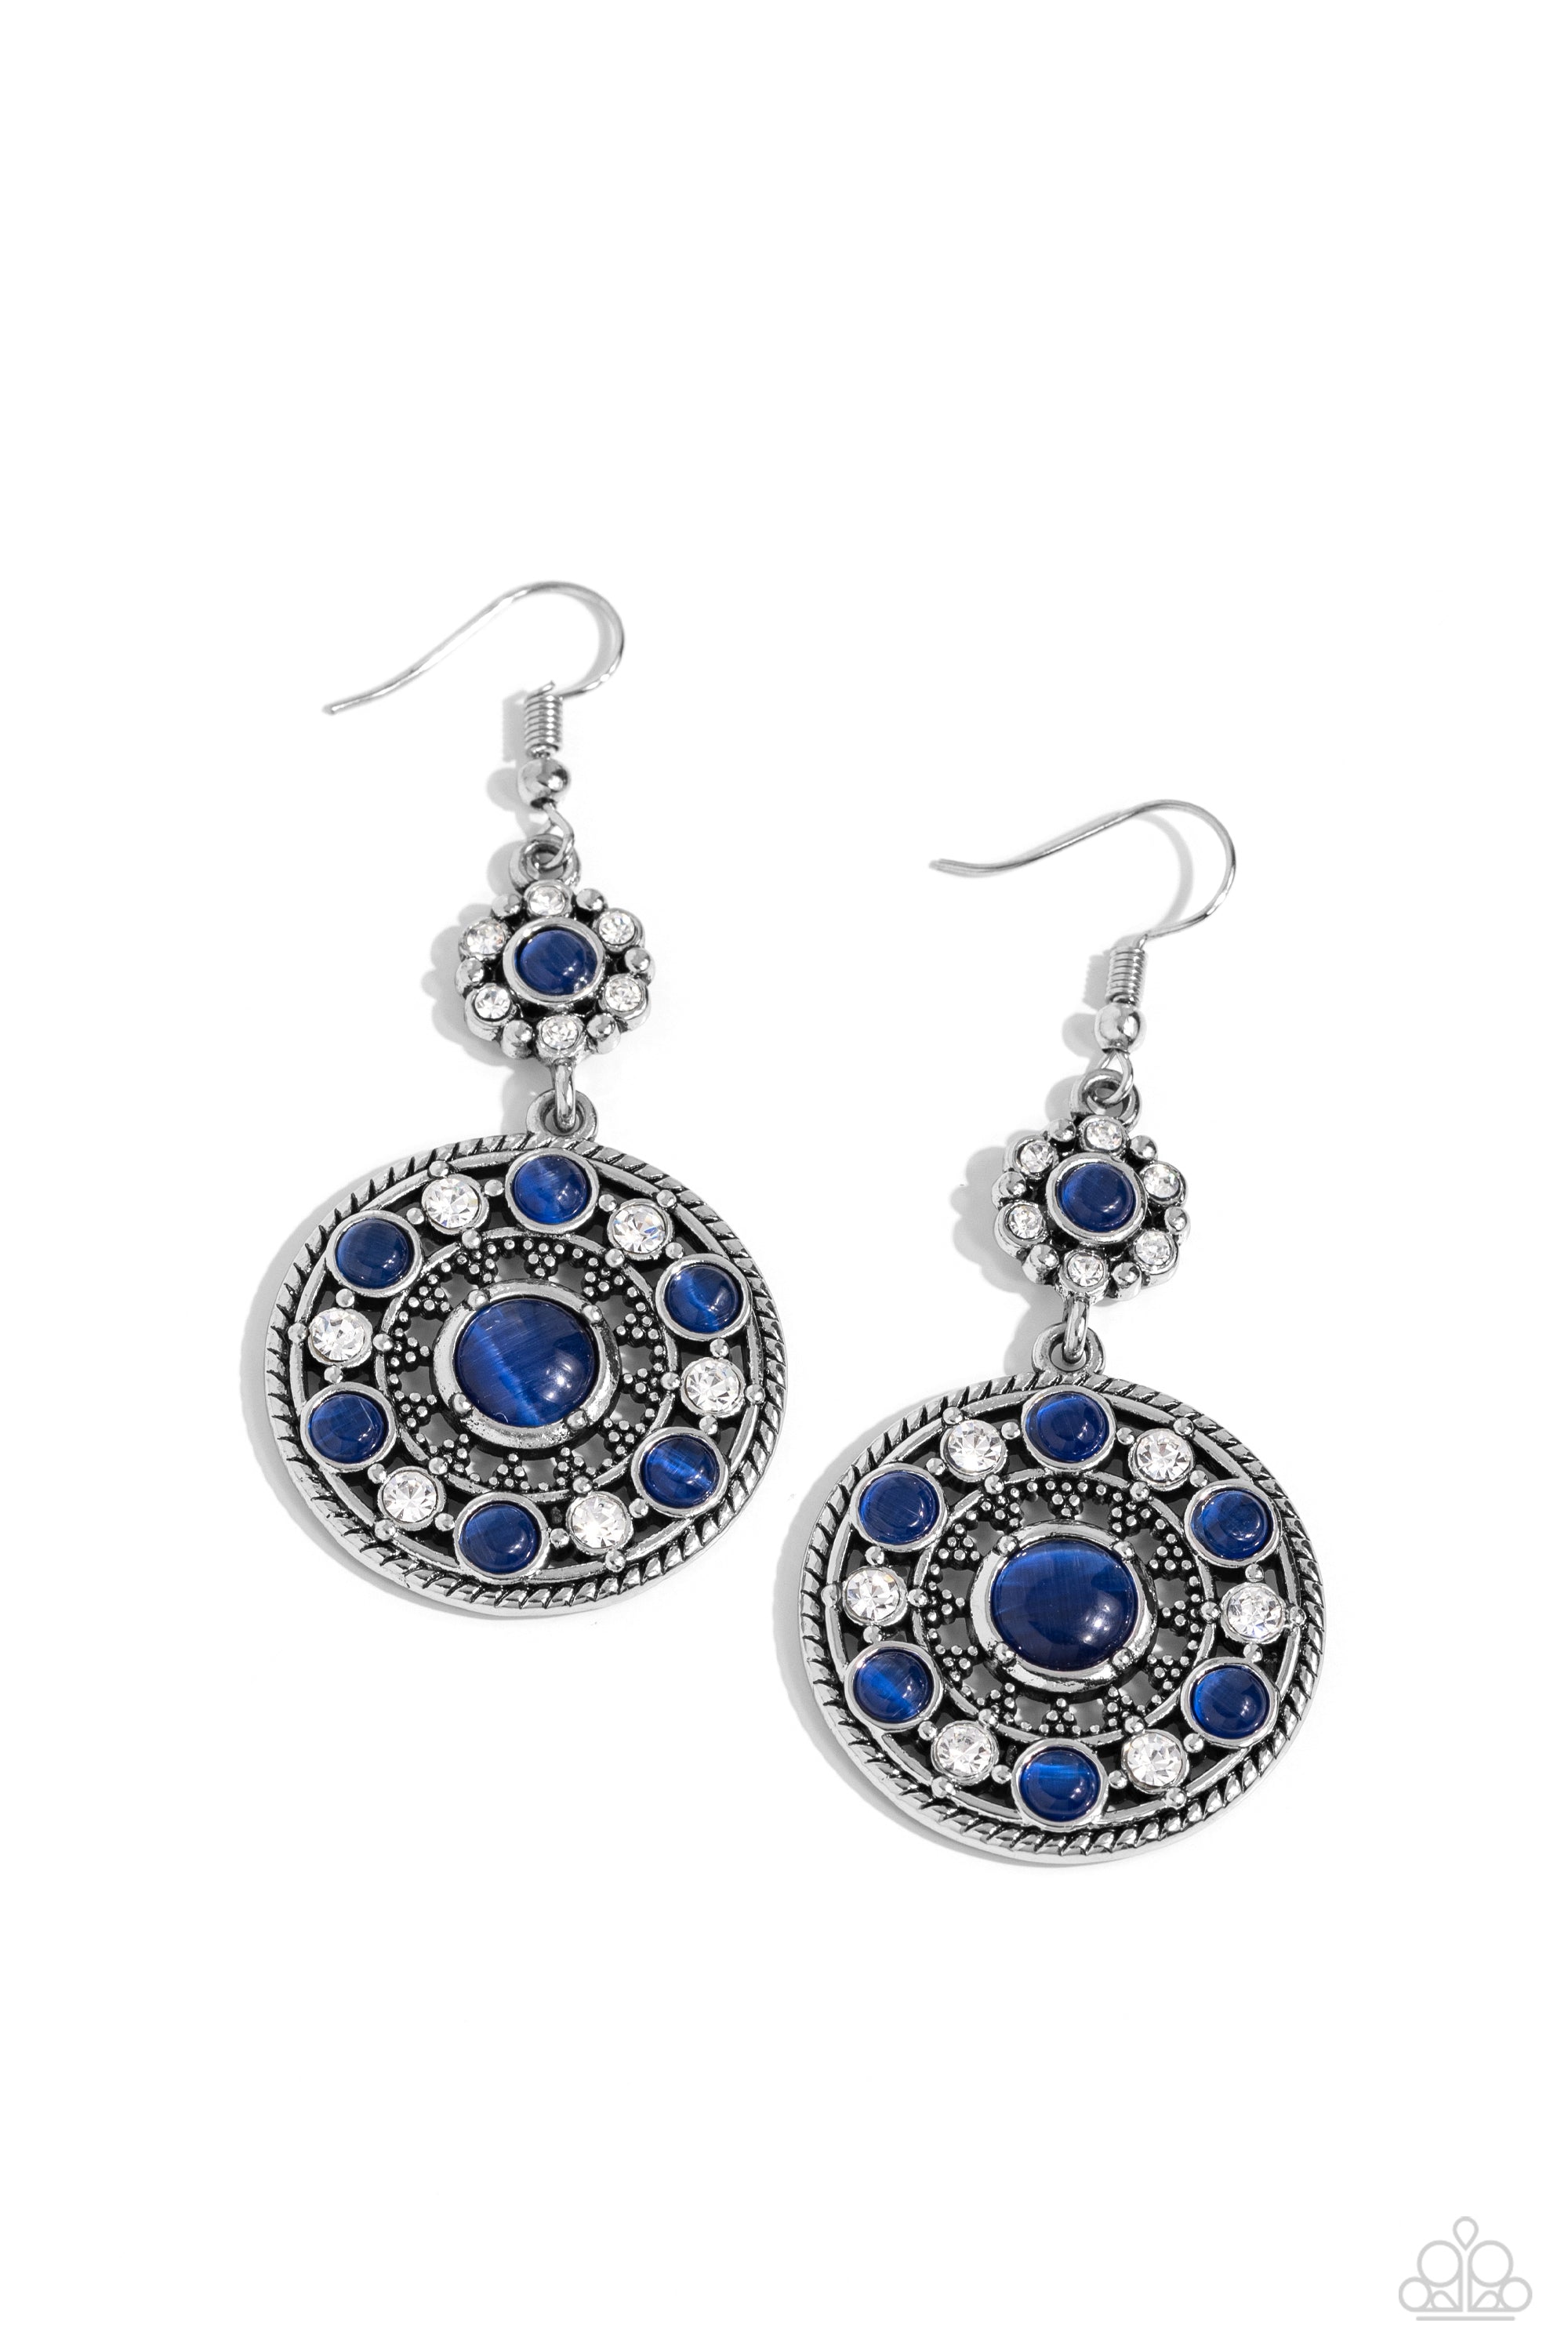 Party at My PALACE Blue Cat's Eye Stone Earrings - Paparazzi Accessories- lightbox - CarasShop.com - $5 Jewelry by Cara Jewels